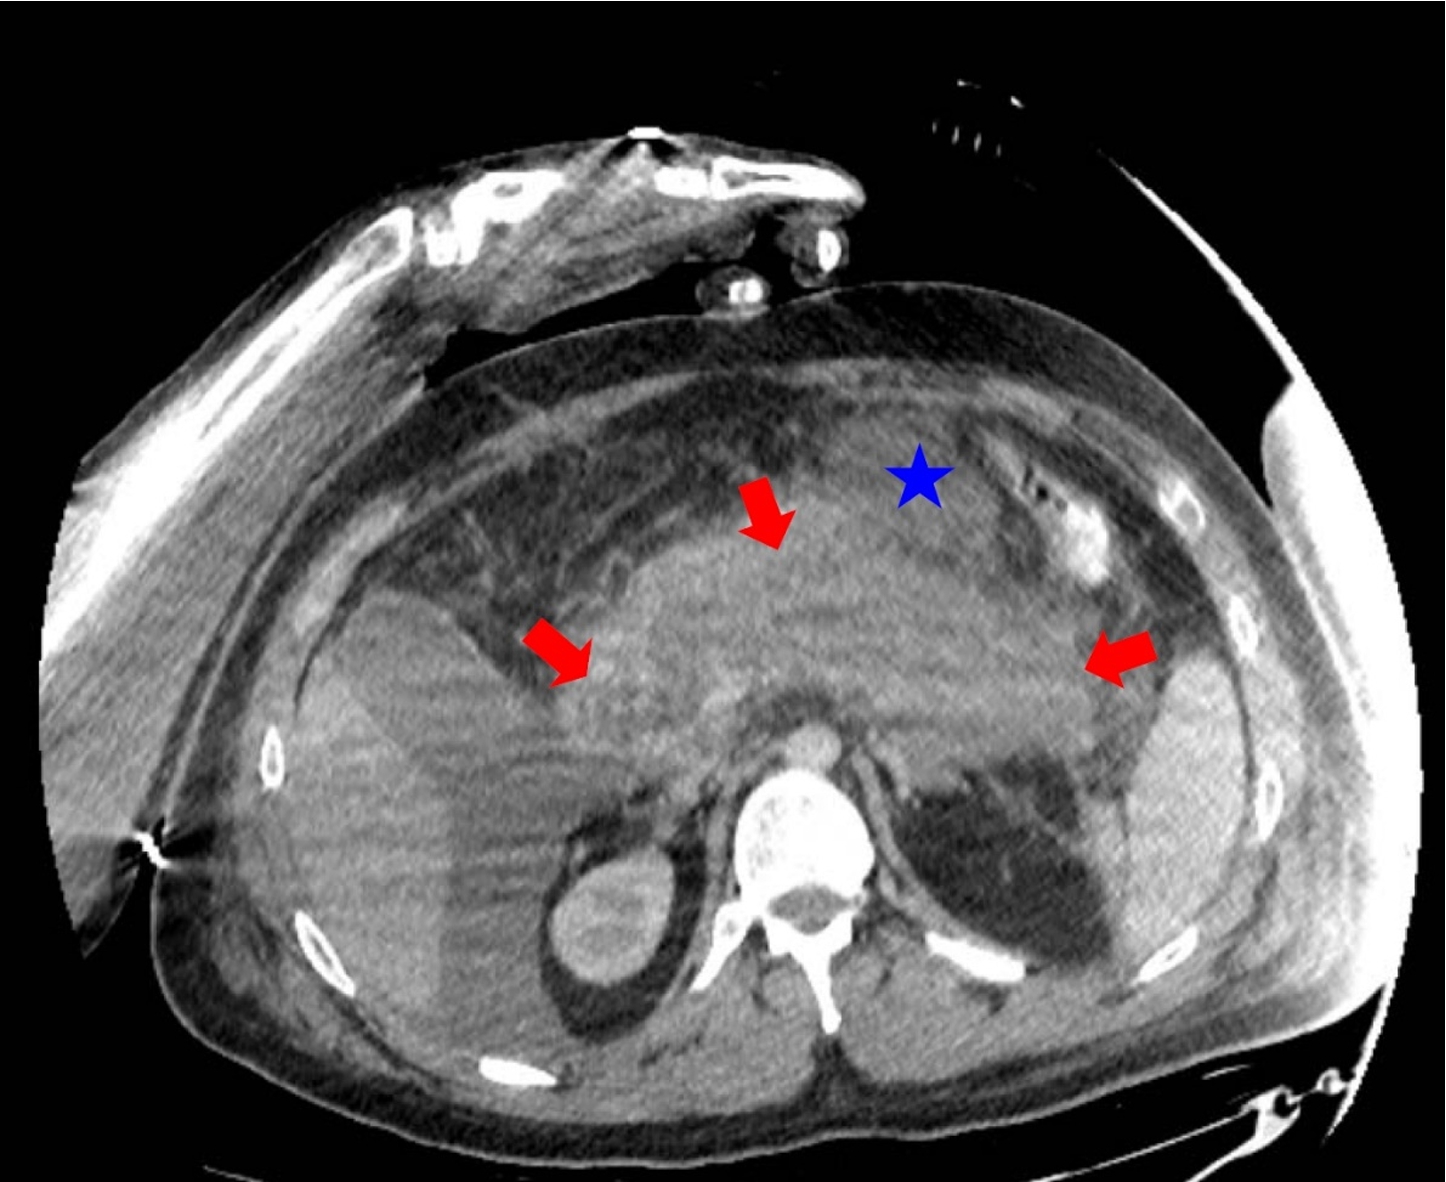 28 years old male with severe acute pancreatitis. Contrast-enhanced CT (portovenous phase, the same axial plane as on CEUS image) confirmed acute necrotizing pancreatitis (arrows) with acute necrotic collection (star).